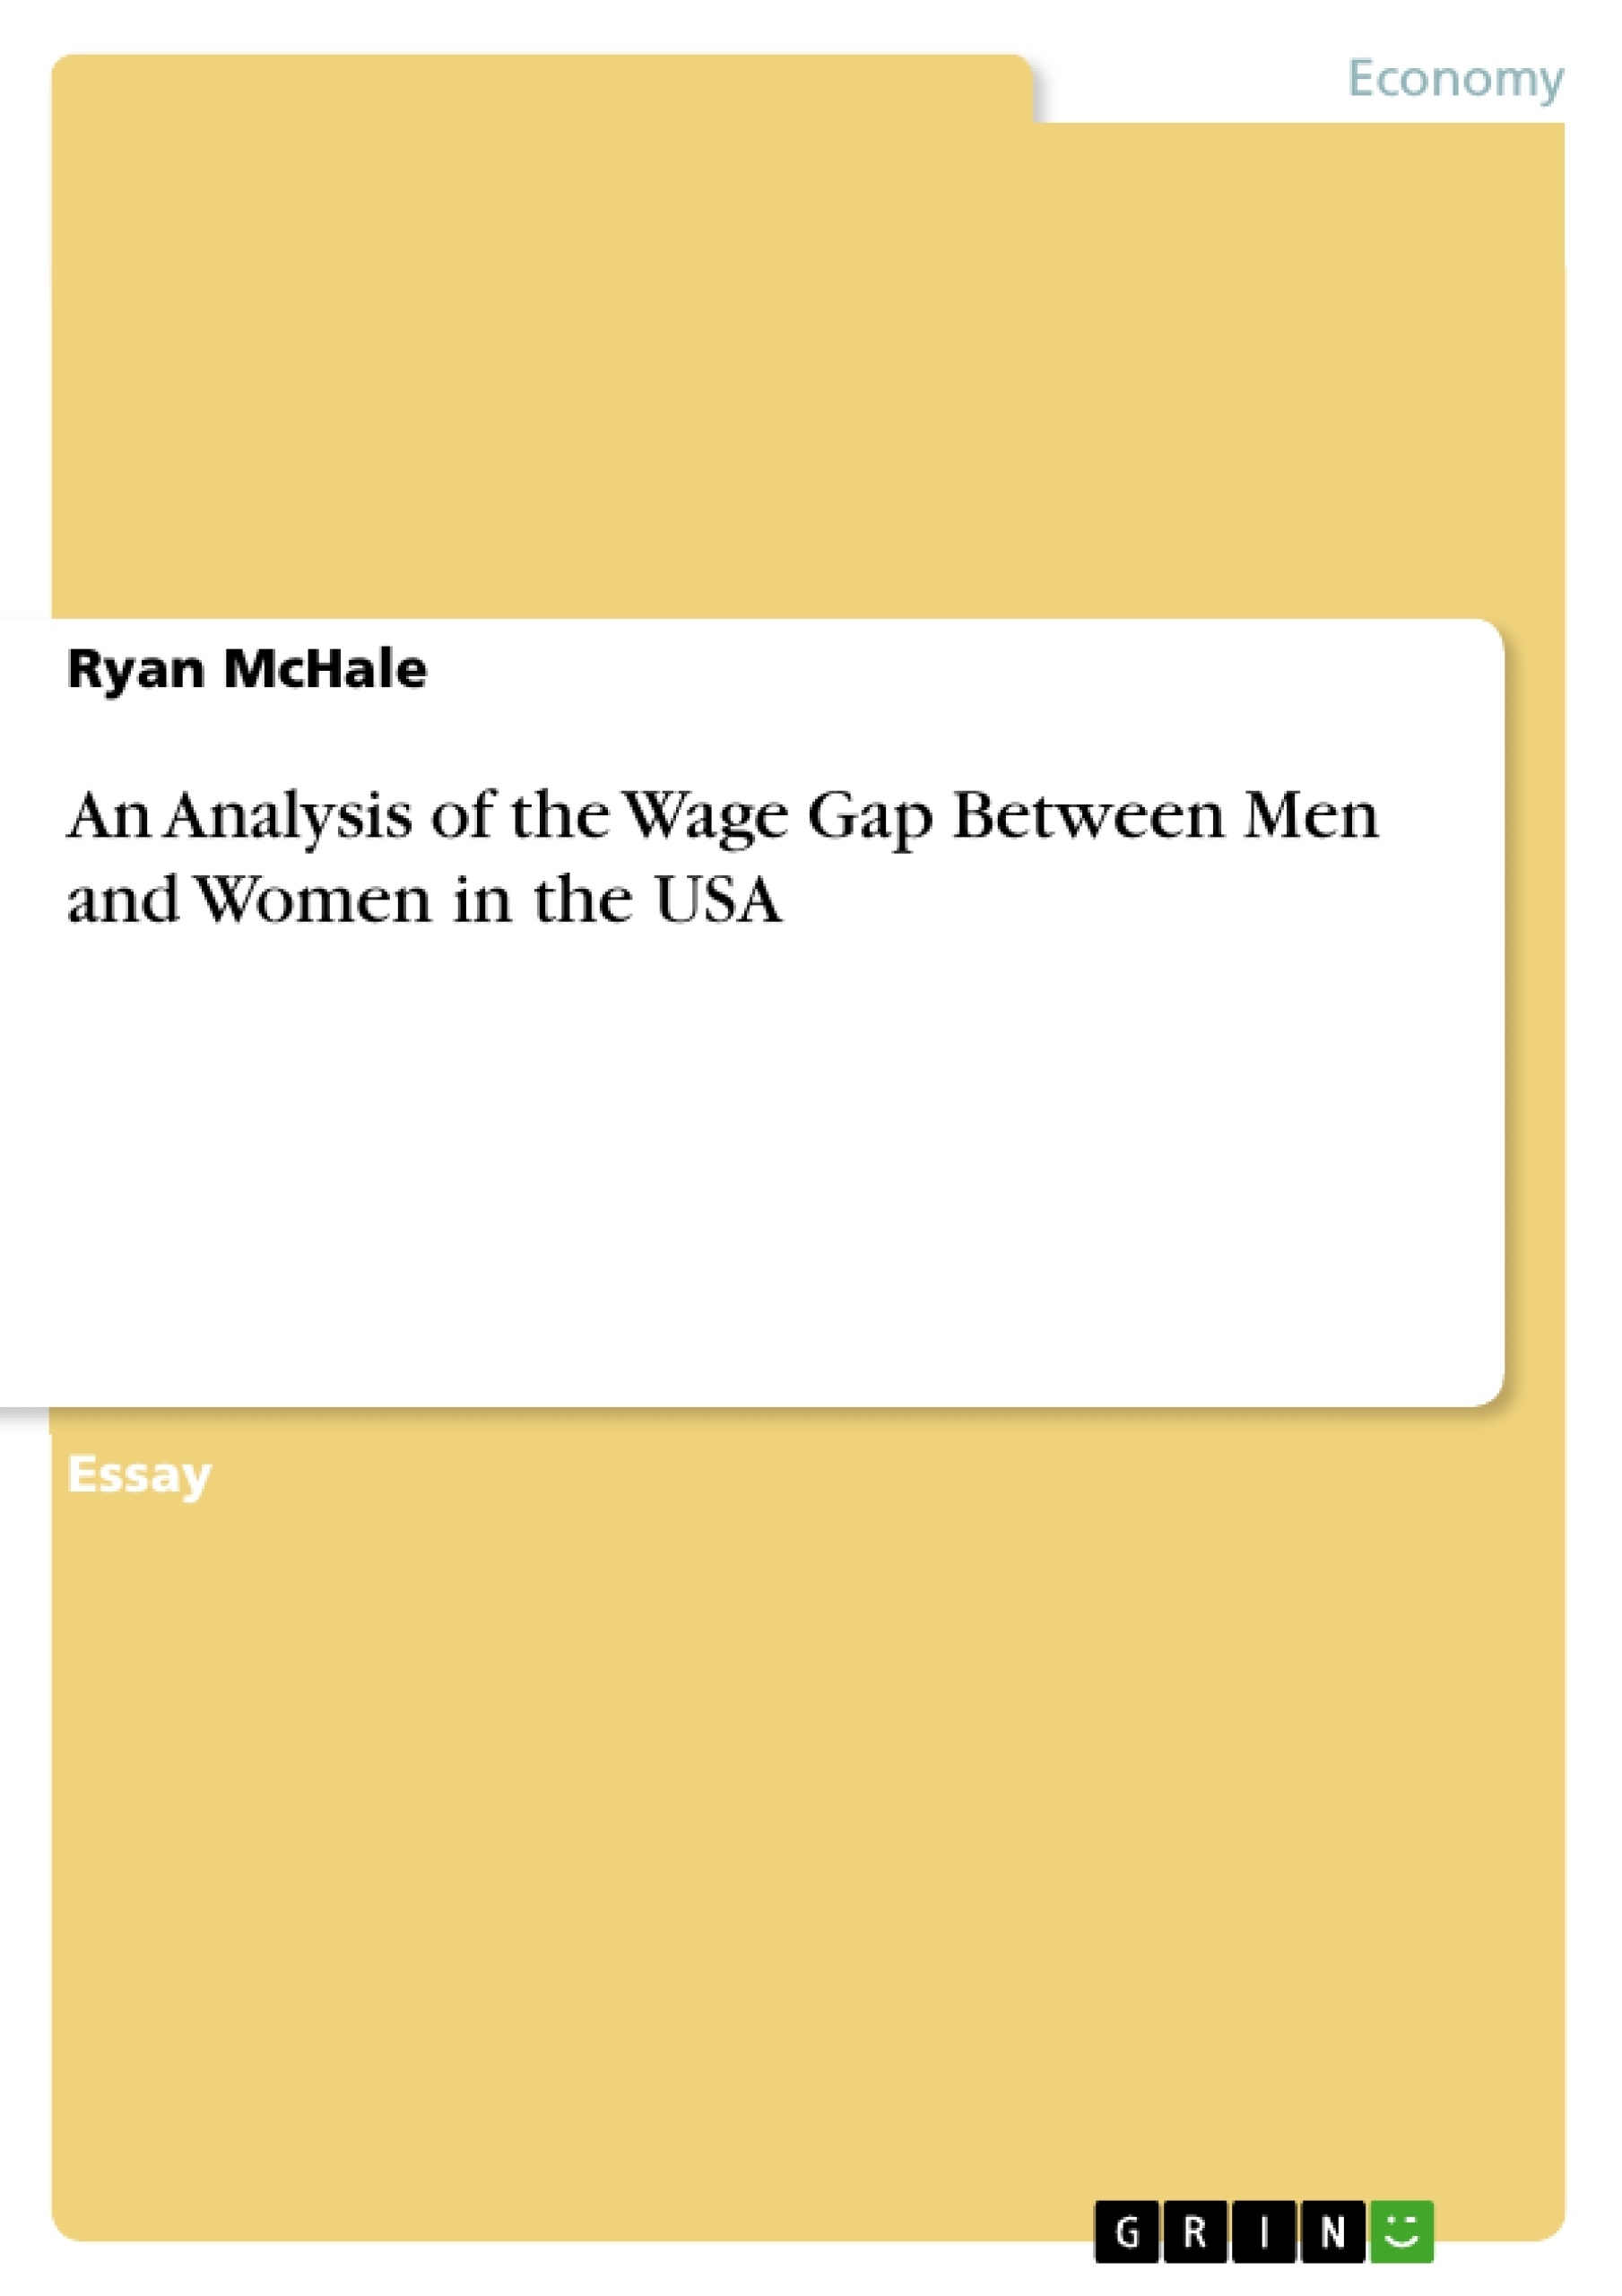 Title: An Analysis of the Wage Gap Between Men and Women in the USA